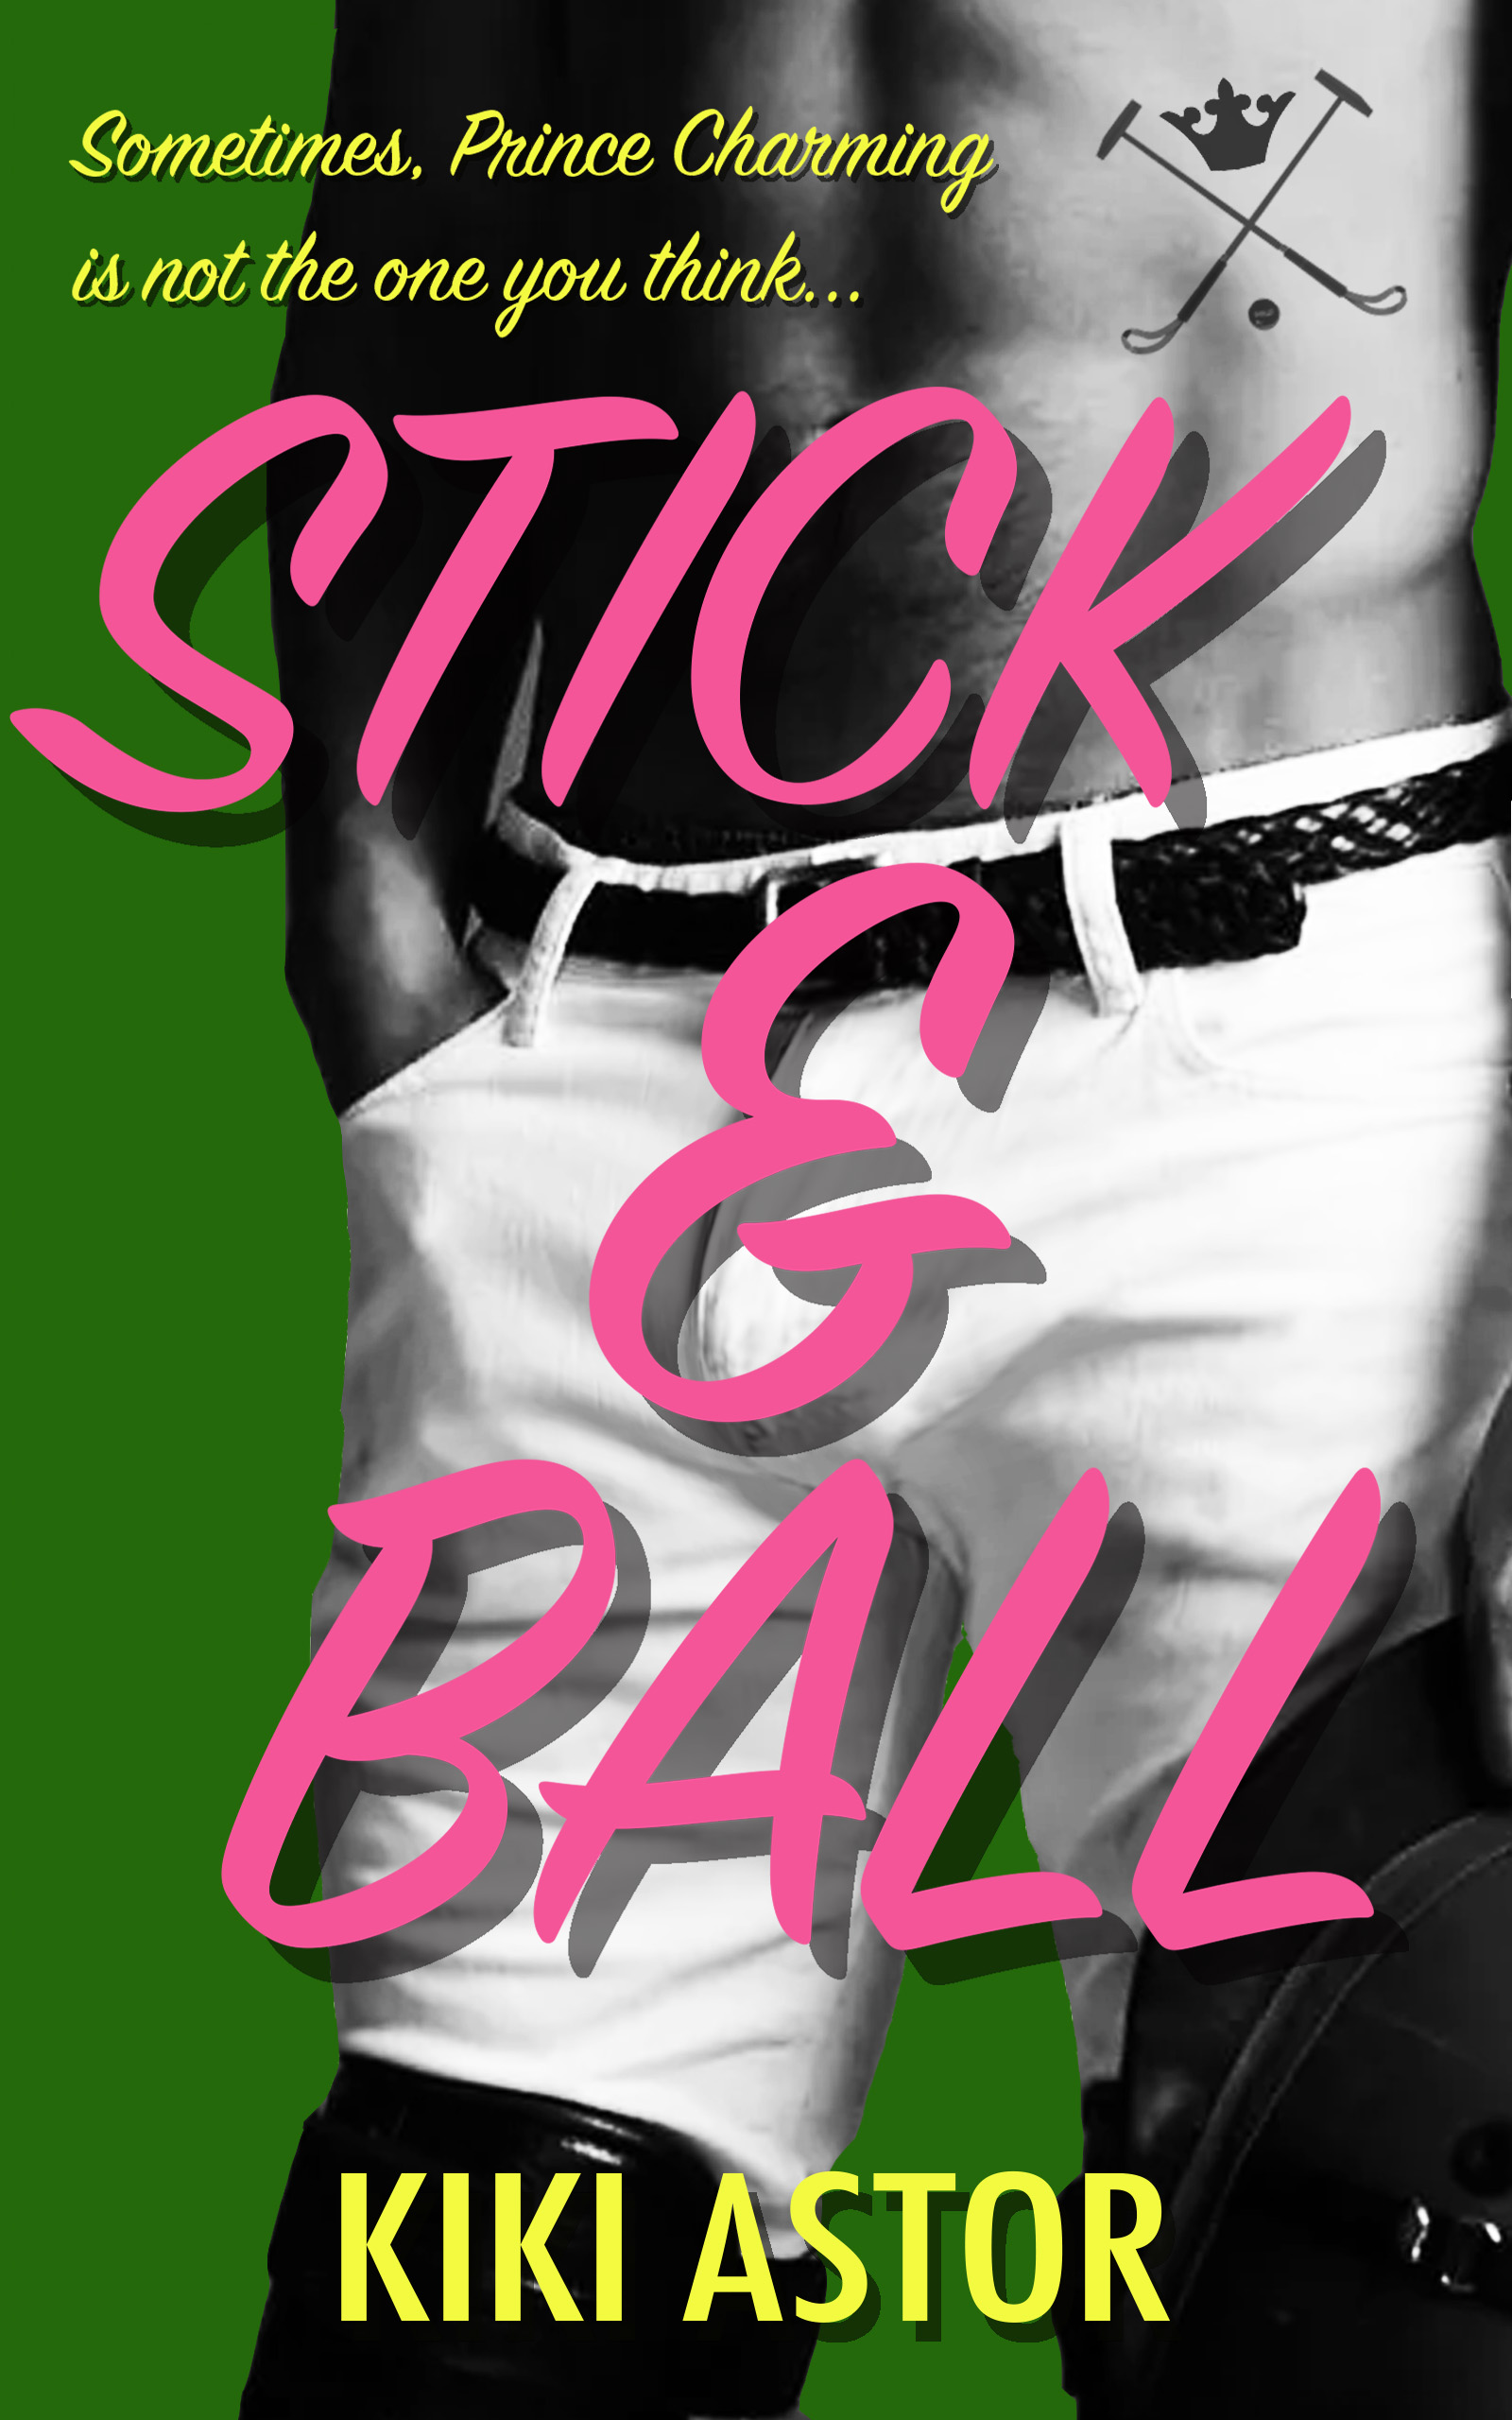 The cover of the romance novel, "Stick and Ball," by author Kiki Astor, featuring a sexy polo player wearing white jeans and horseback riding boots, and a tattoo of polo mallets and crown.